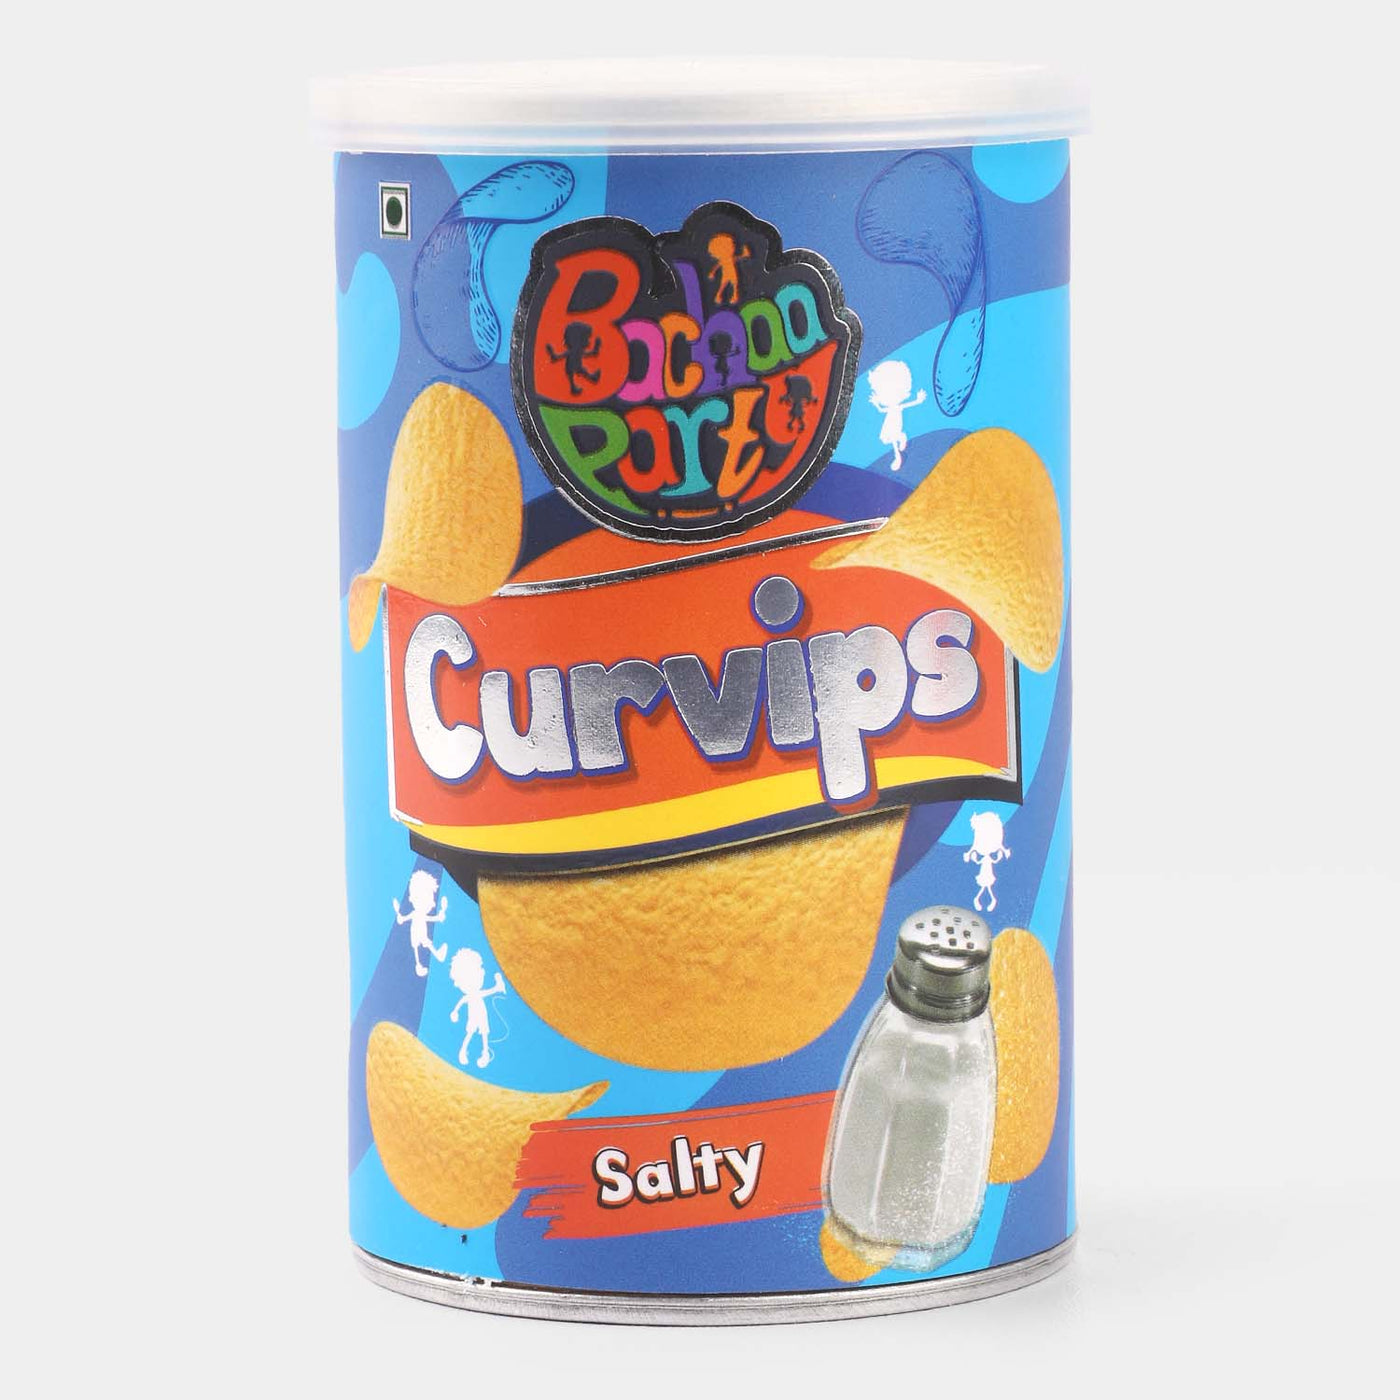 Bachaa Party Curvips Salty Potato Chips